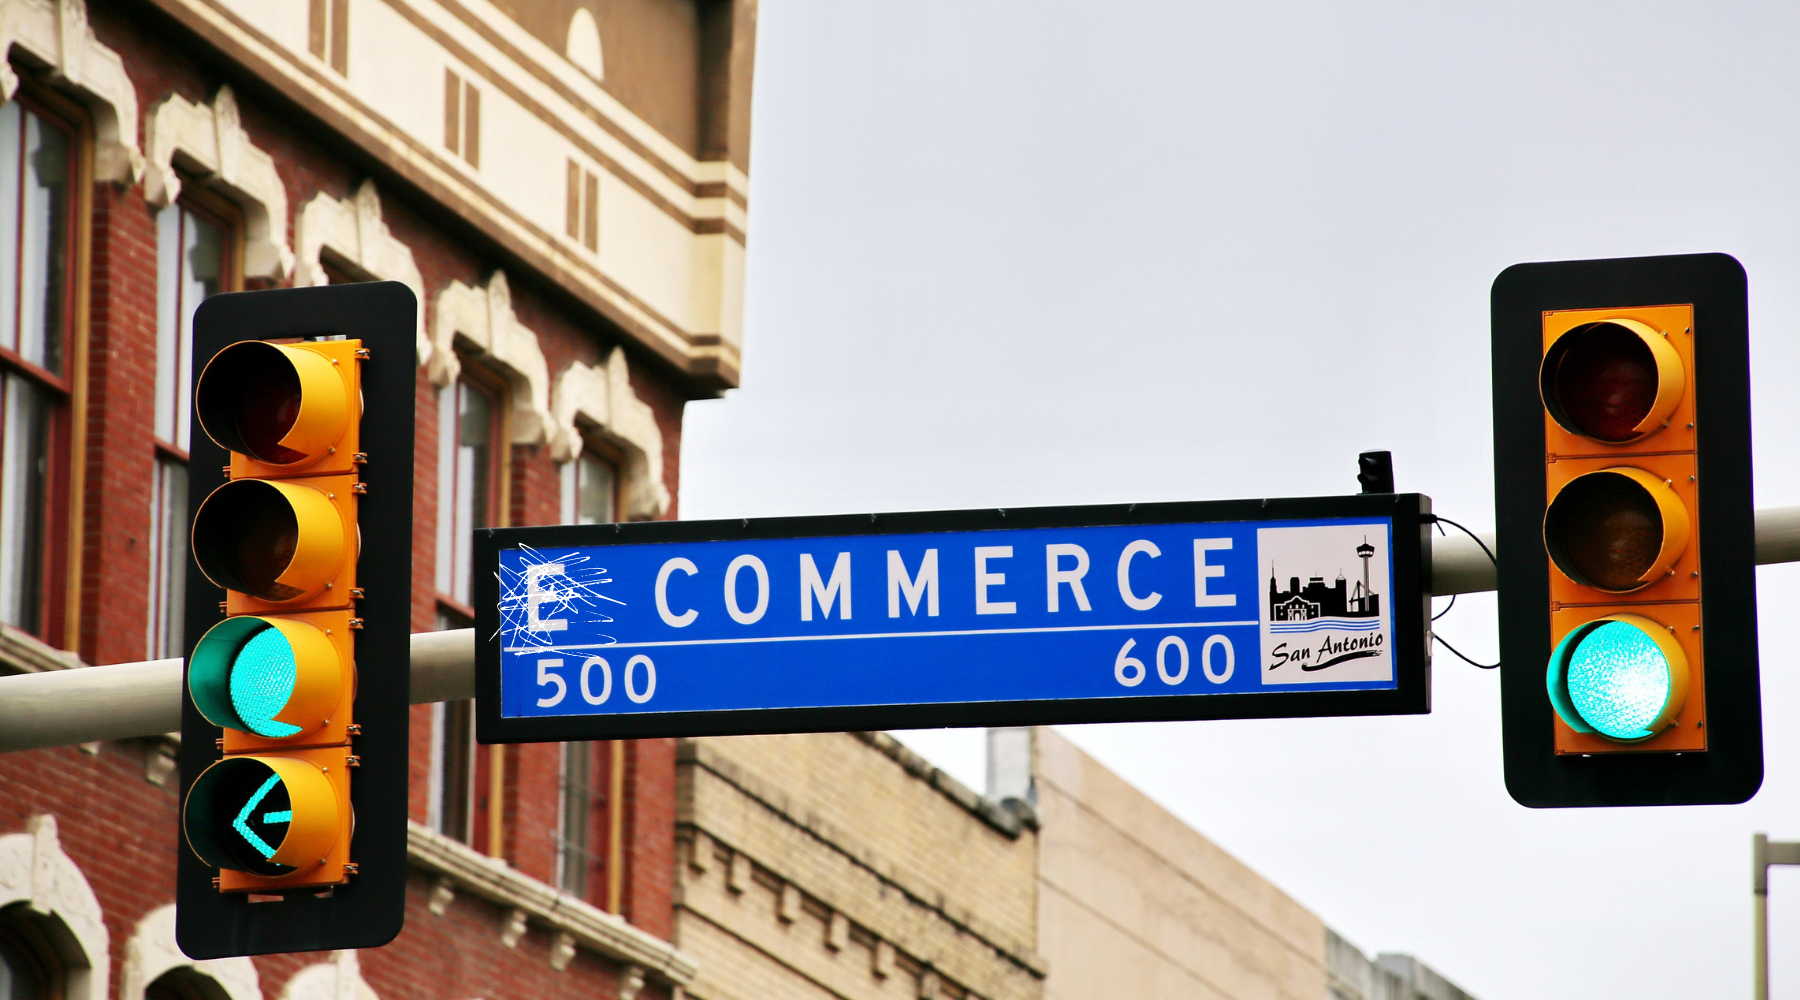 Where is Commerce Headed?